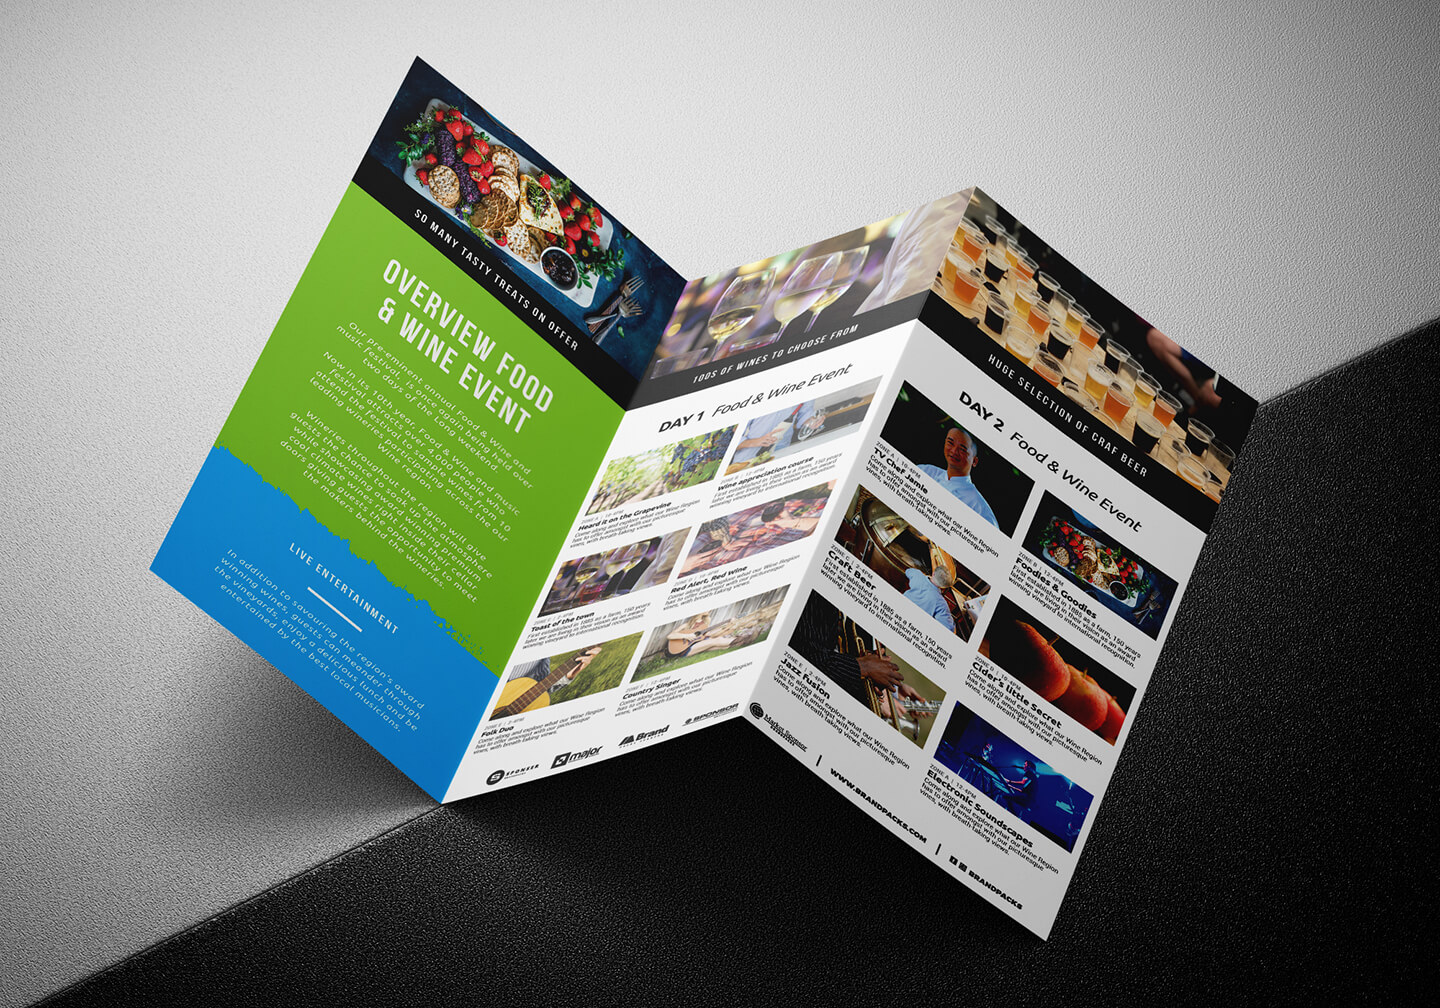 Free Tri Fold Brochure Template For Events & Festivals - Psd Inside Free Online Tri Fold Brochure Template